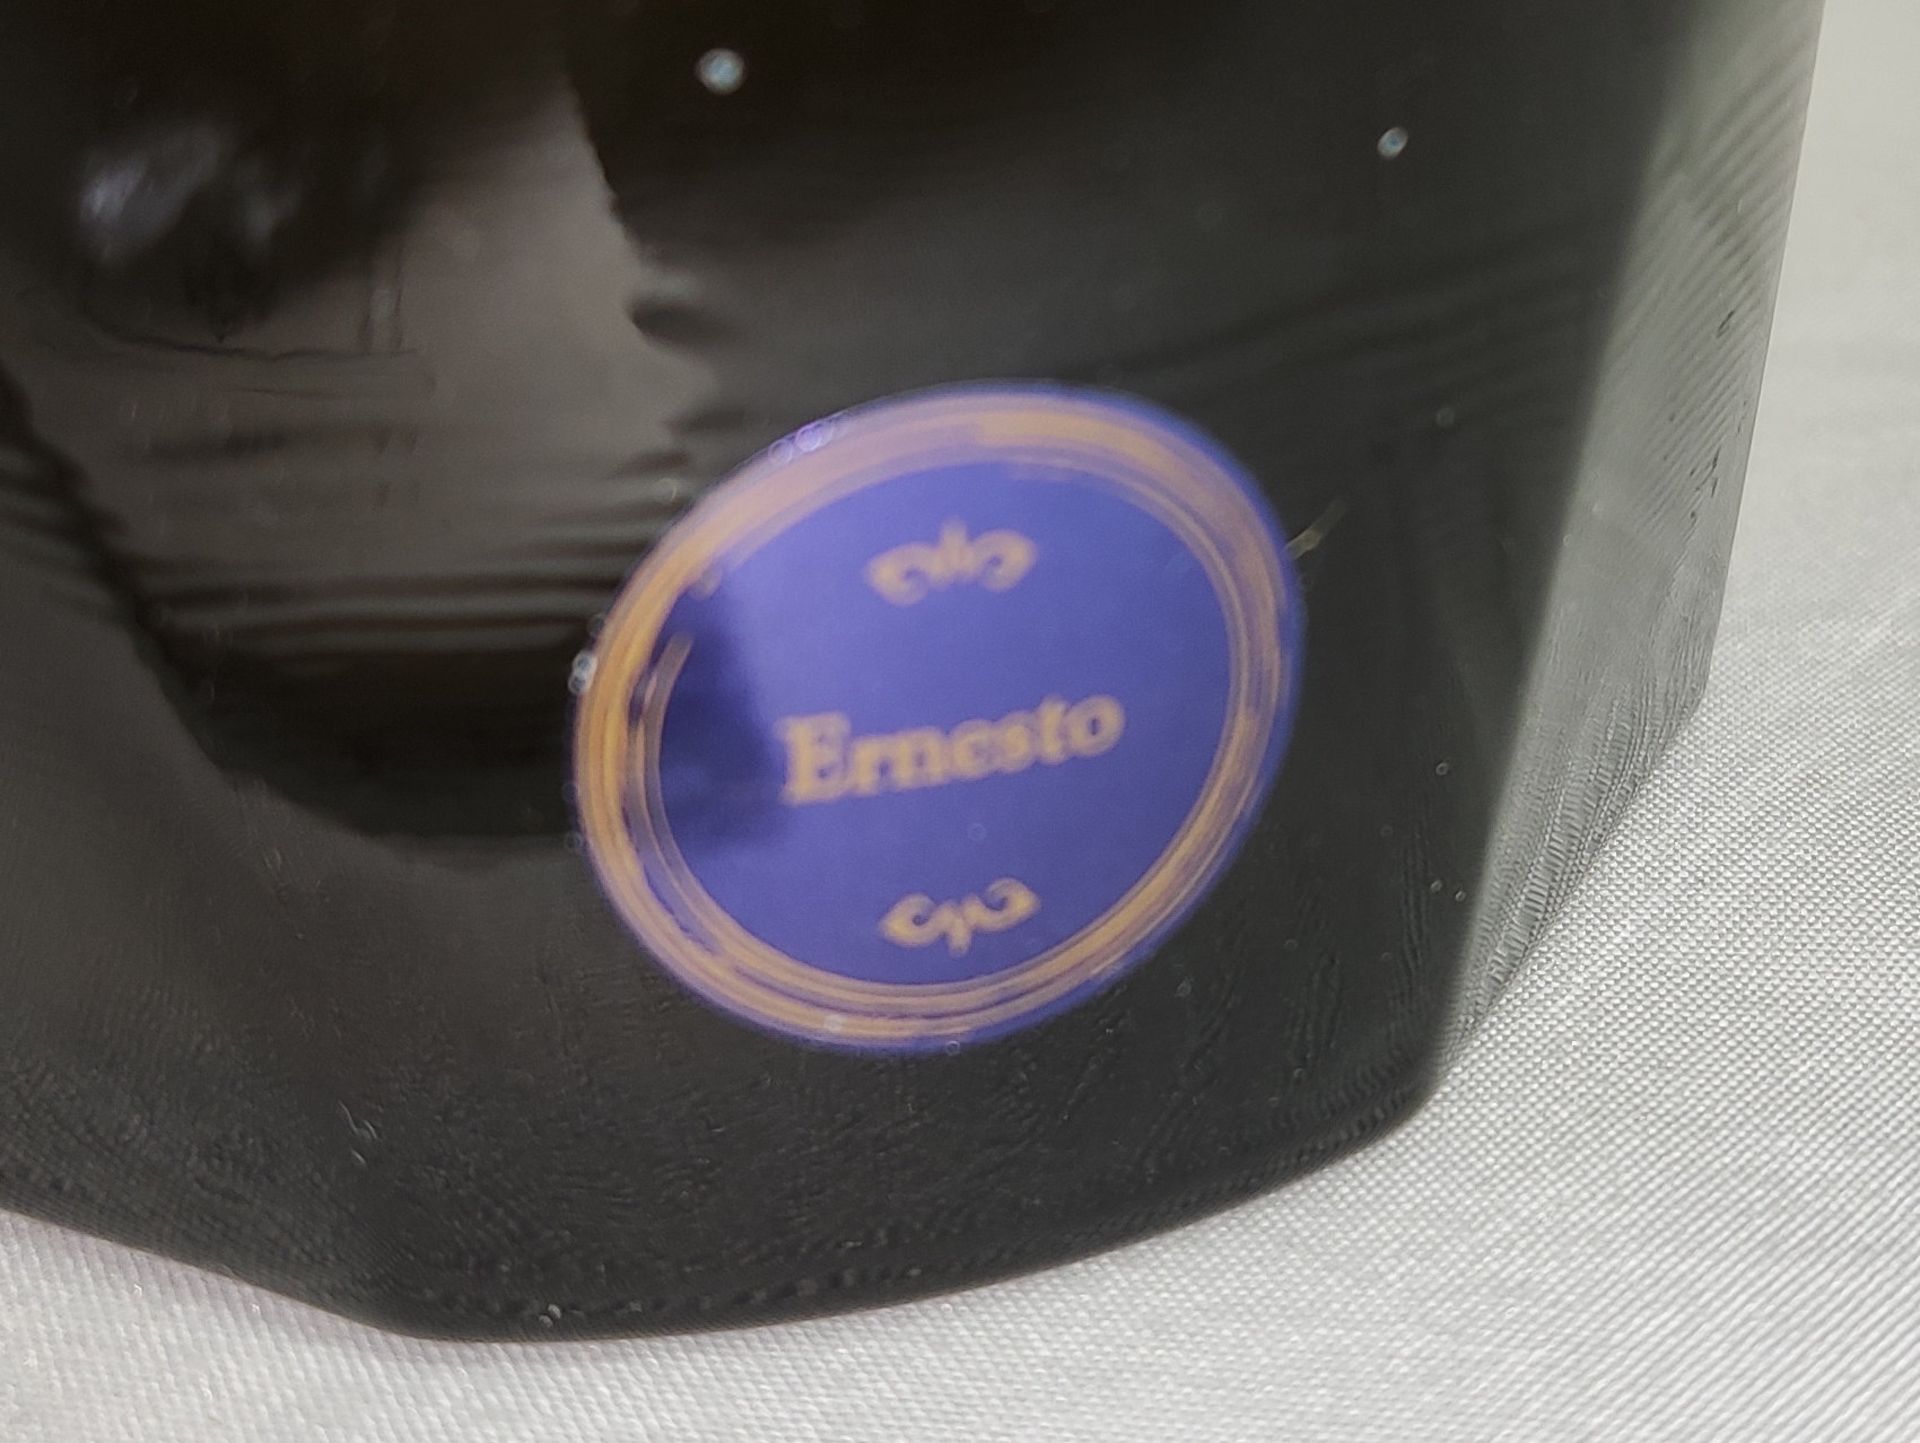 1 x TRUDON Ernesto 270G Candle - Boxed - Original RRP £90 - Ref: 2559342/HJL409/C27/07-23 - - Image 6 of 16